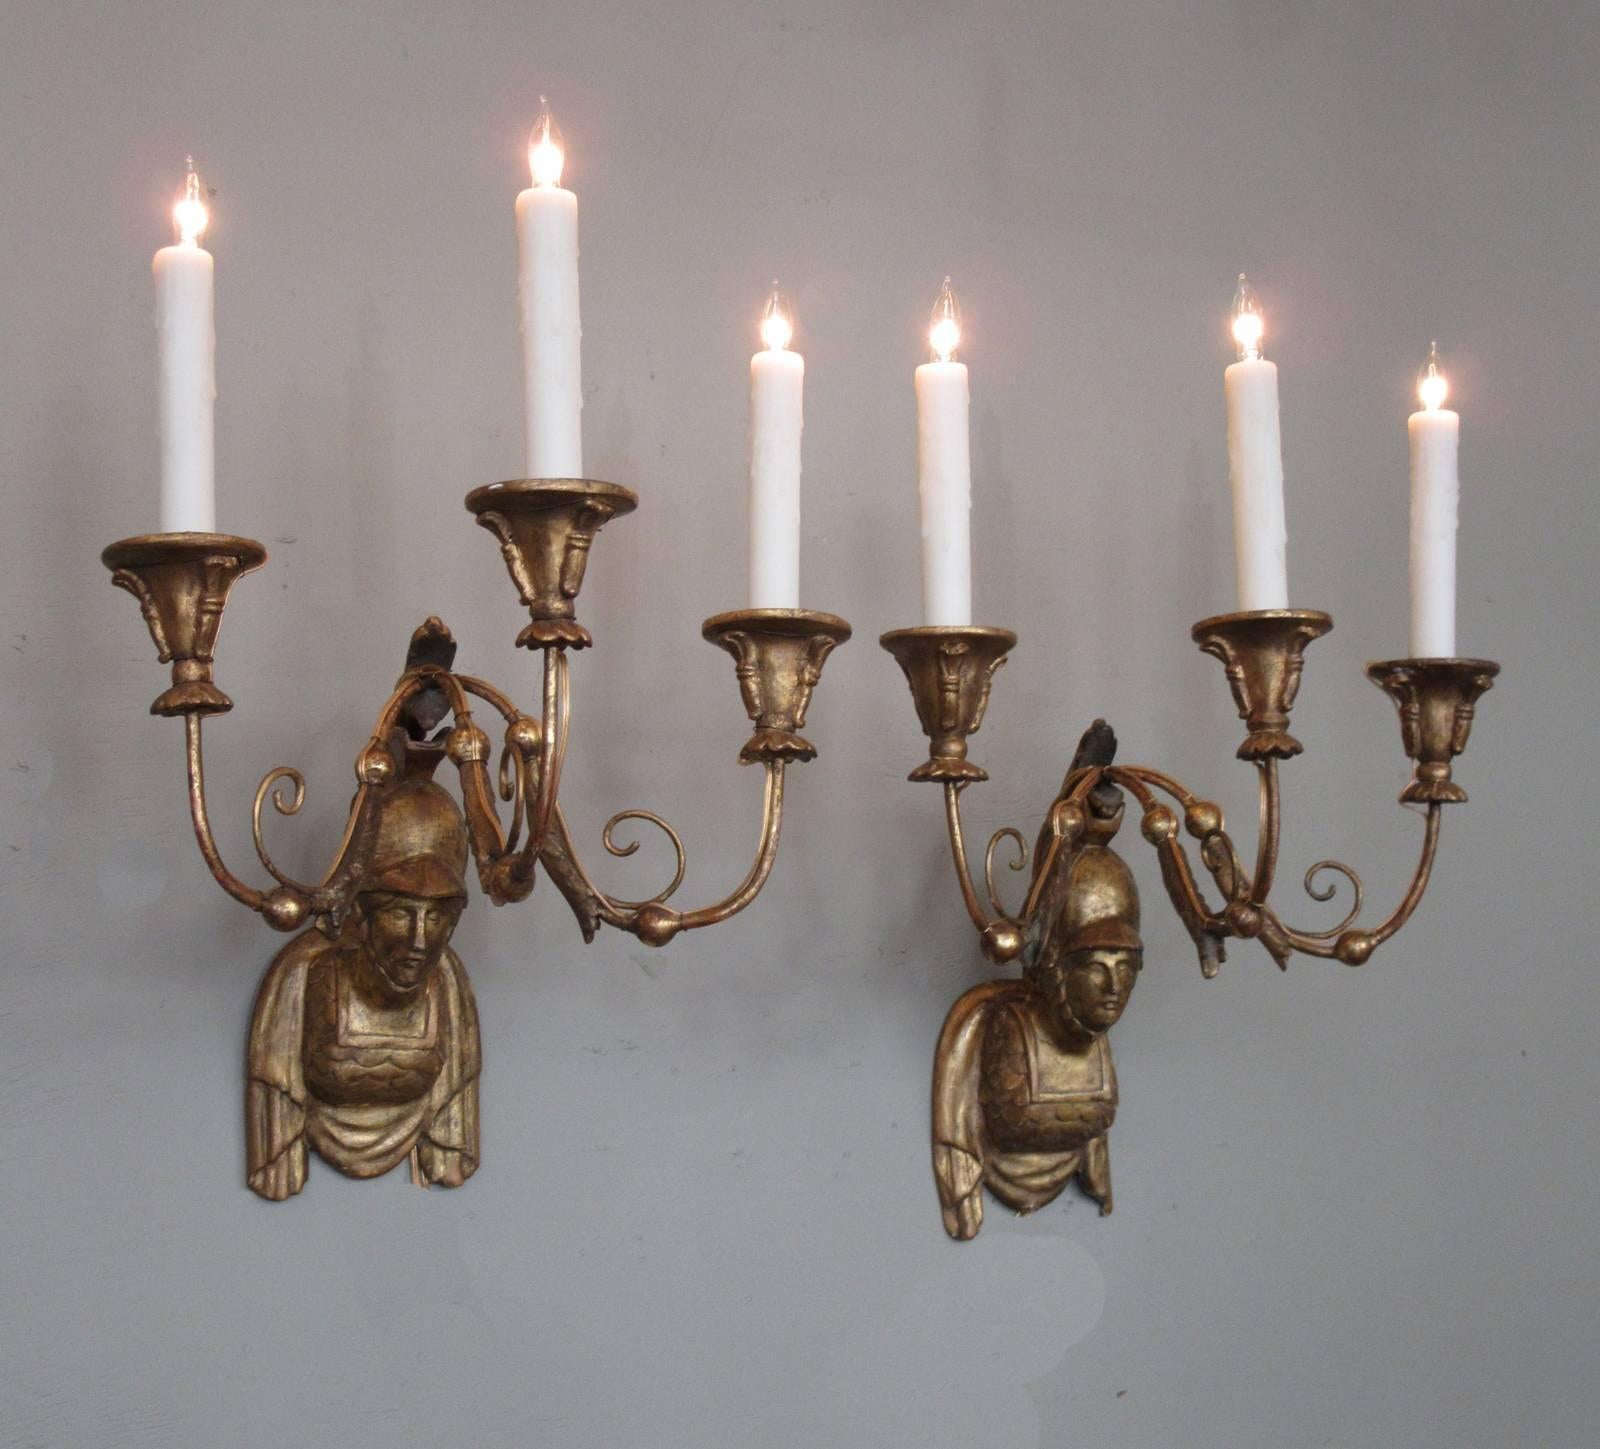 Early 19th Century Italian Neoclassical Giltwood Sconces with Roman Soldier Bust For Sale 4